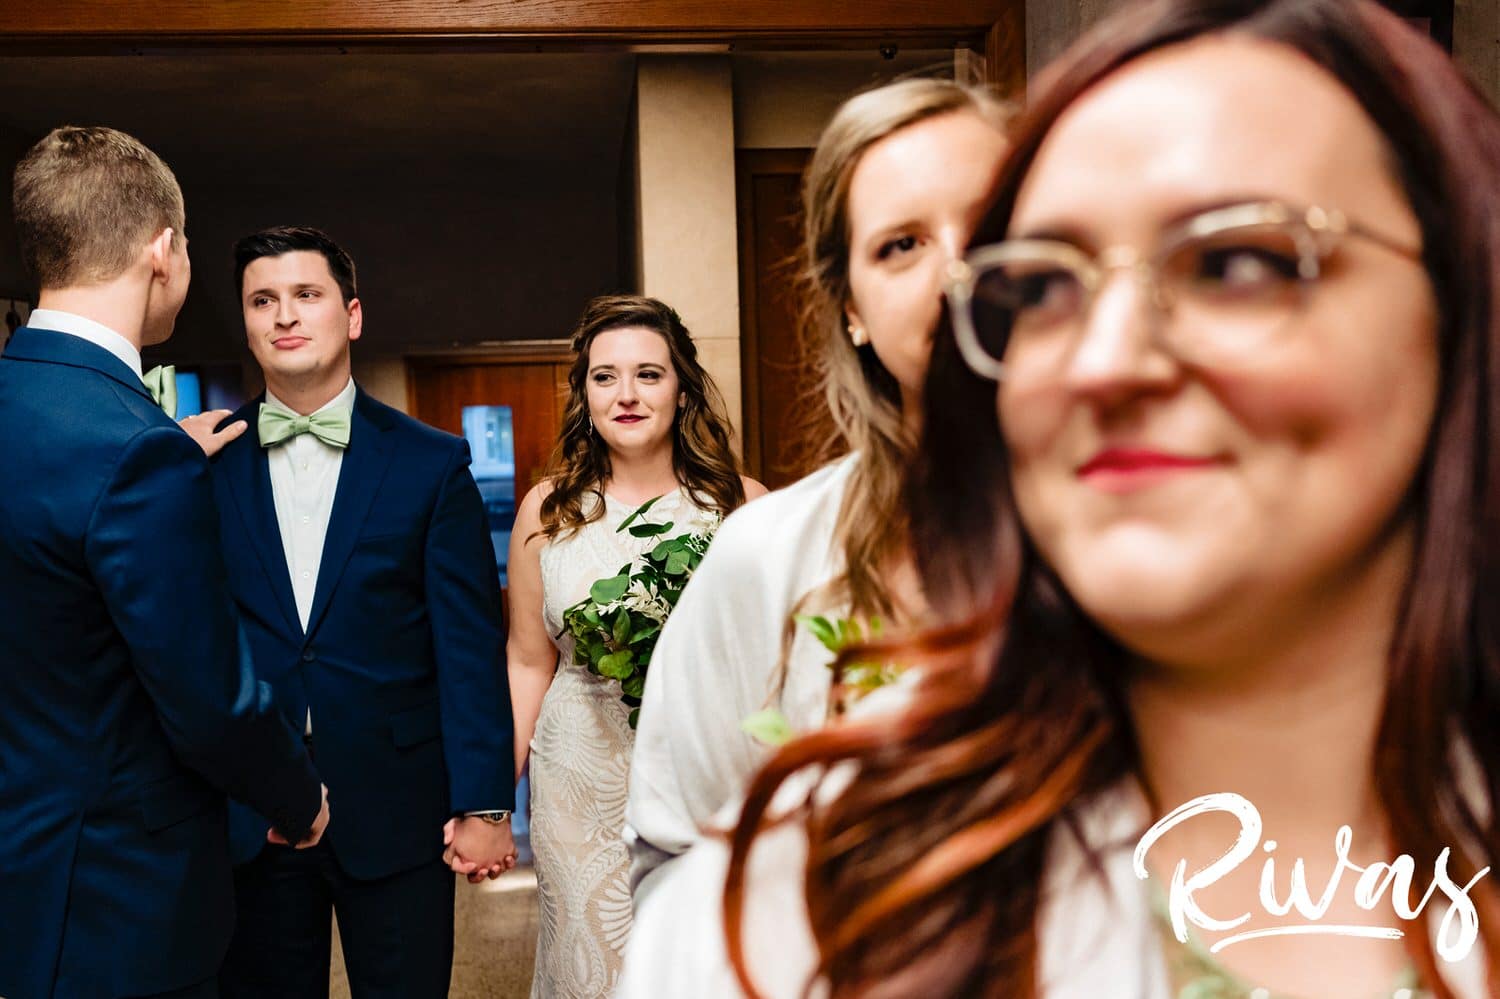 A colorful, candid picture of a groom's best man giving him last minute advice as he lines up to walk down the aisle with his bride during their fall wedding ceremony in Kansas City. 